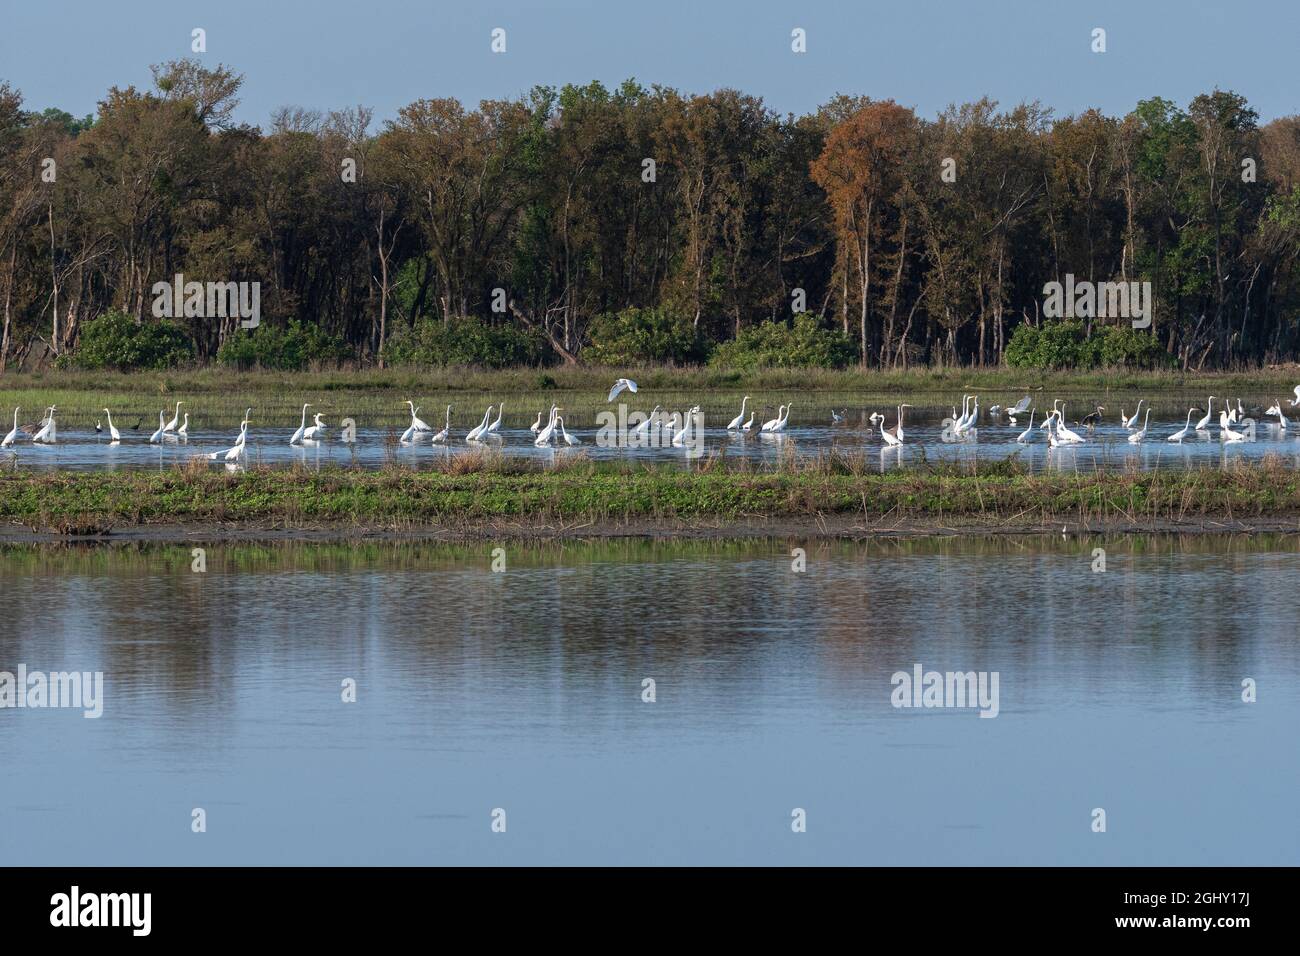 A large gathering of Great White and Snowy Egrets wading in the shallow water between a peninsula and a distant tree covered lake shore. Stock Photo